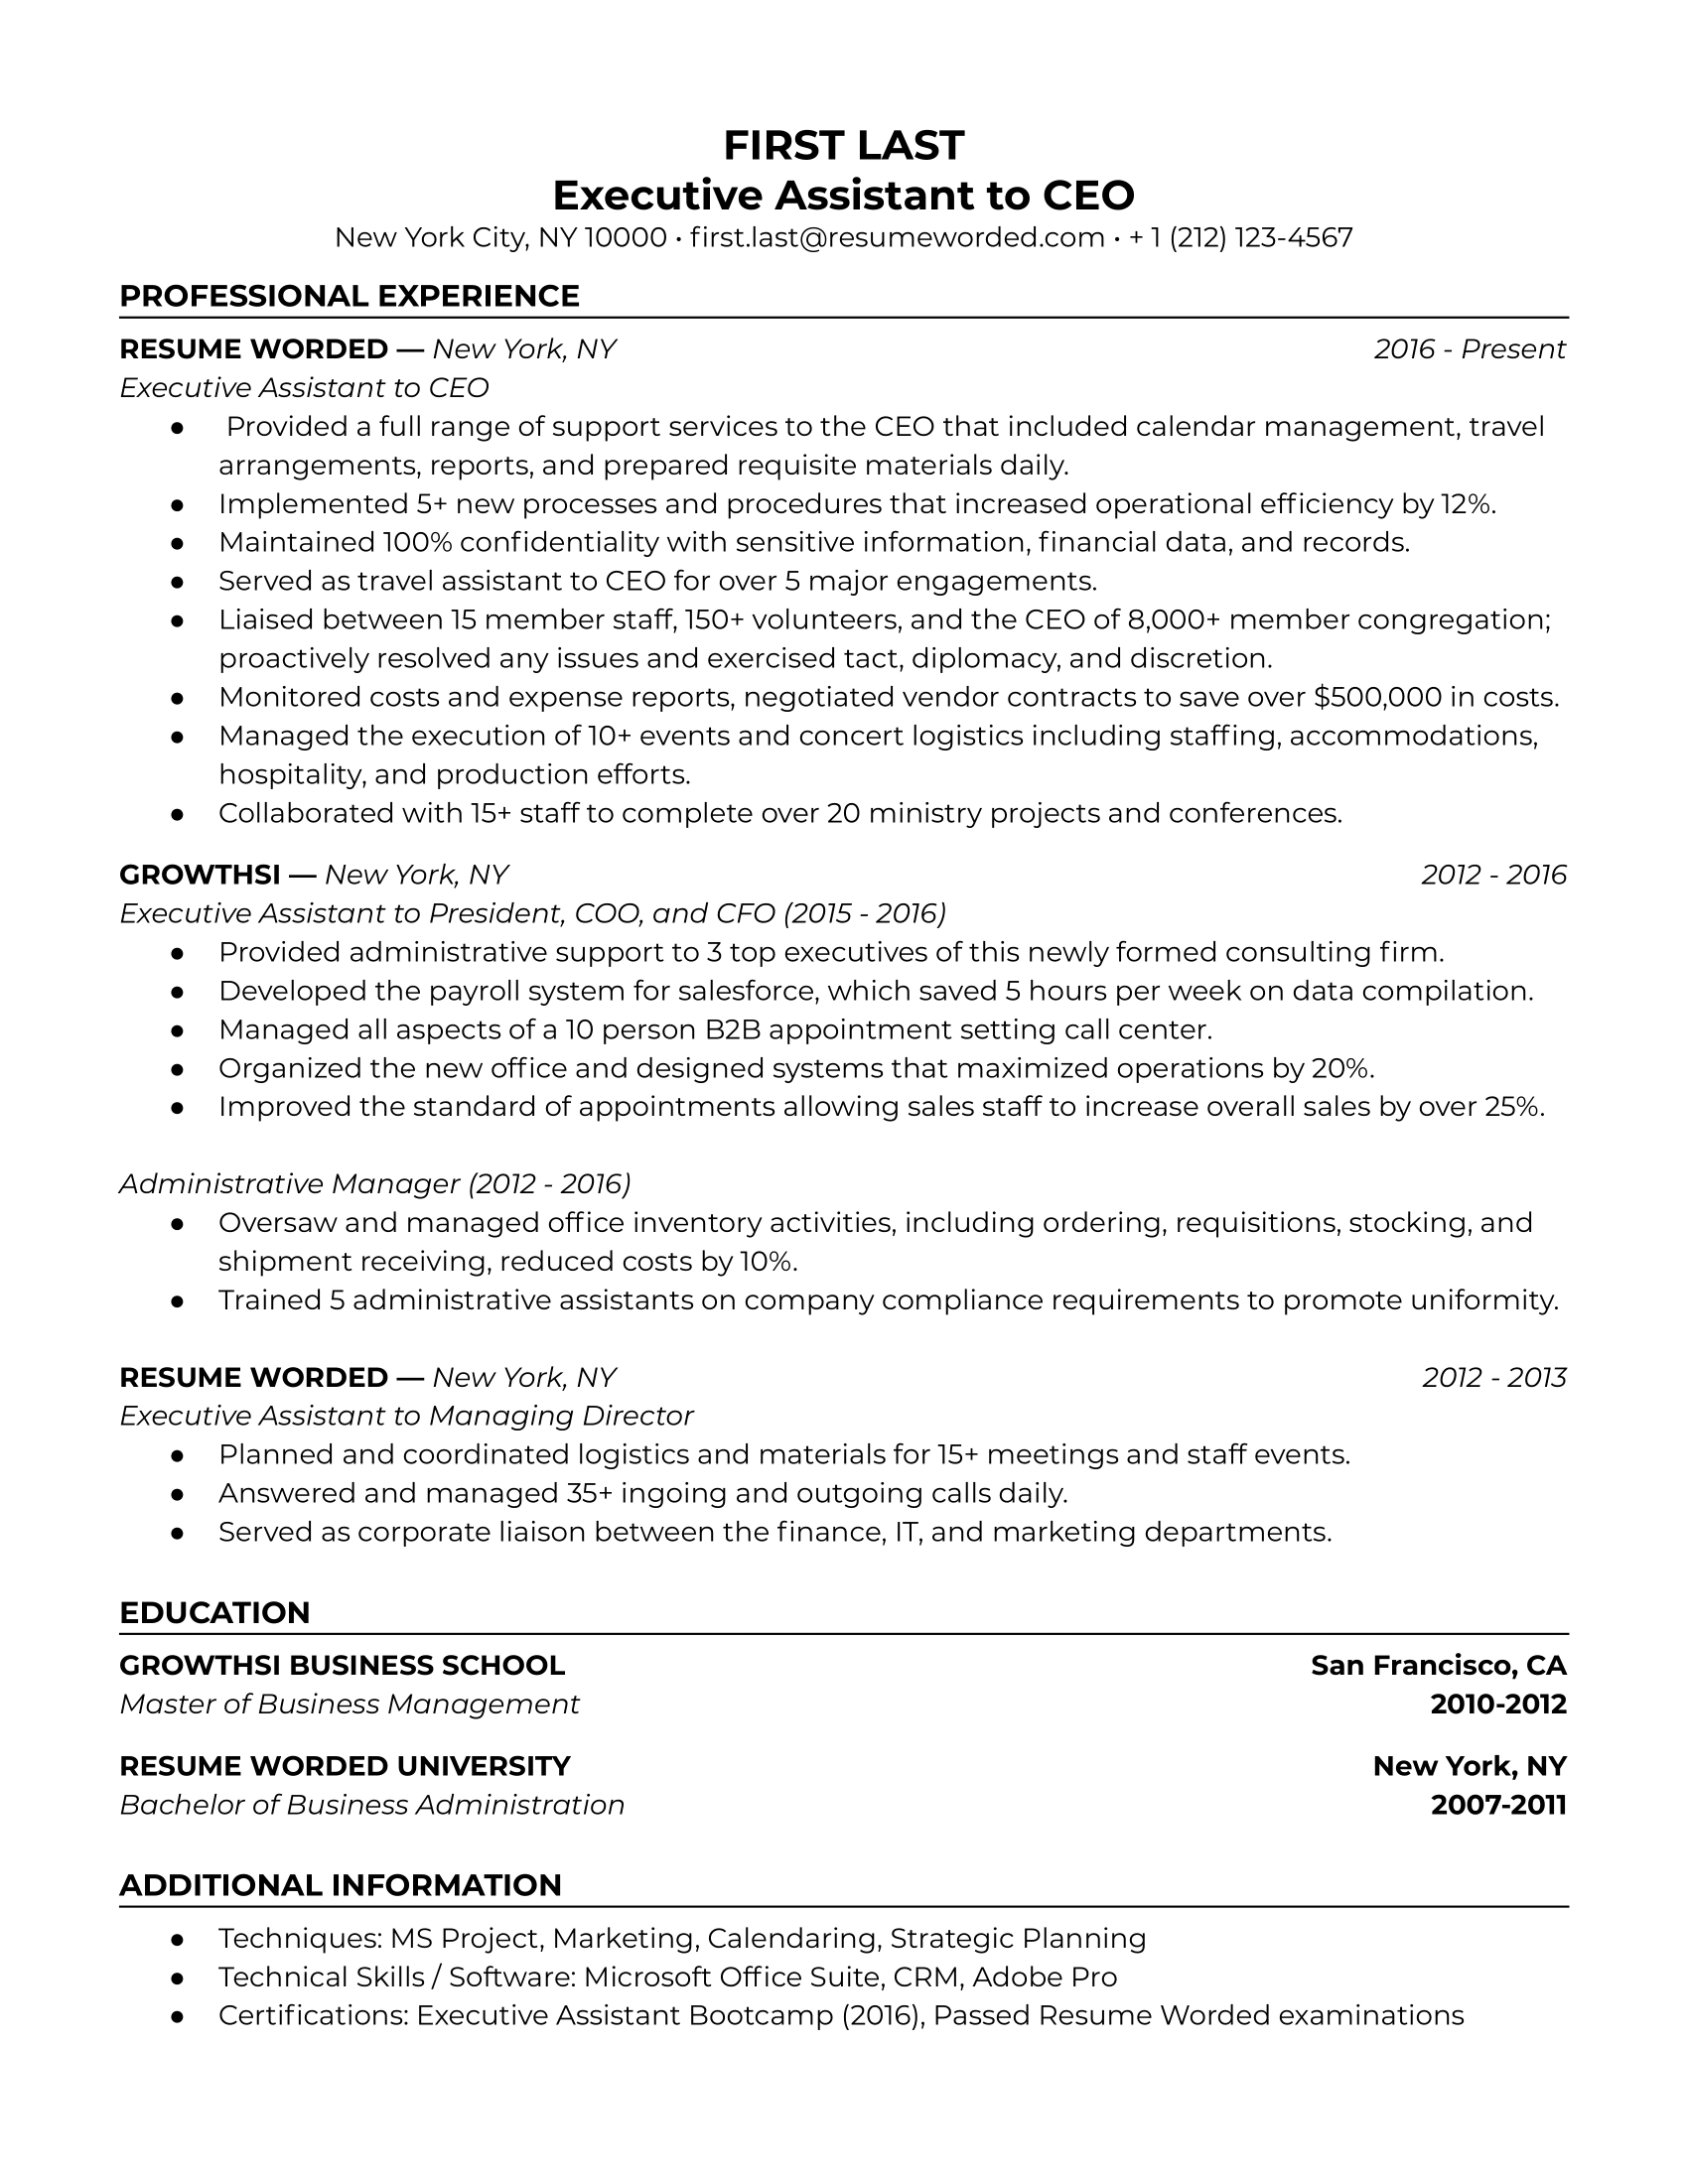 Executive Assistant to CEO Resume Sample